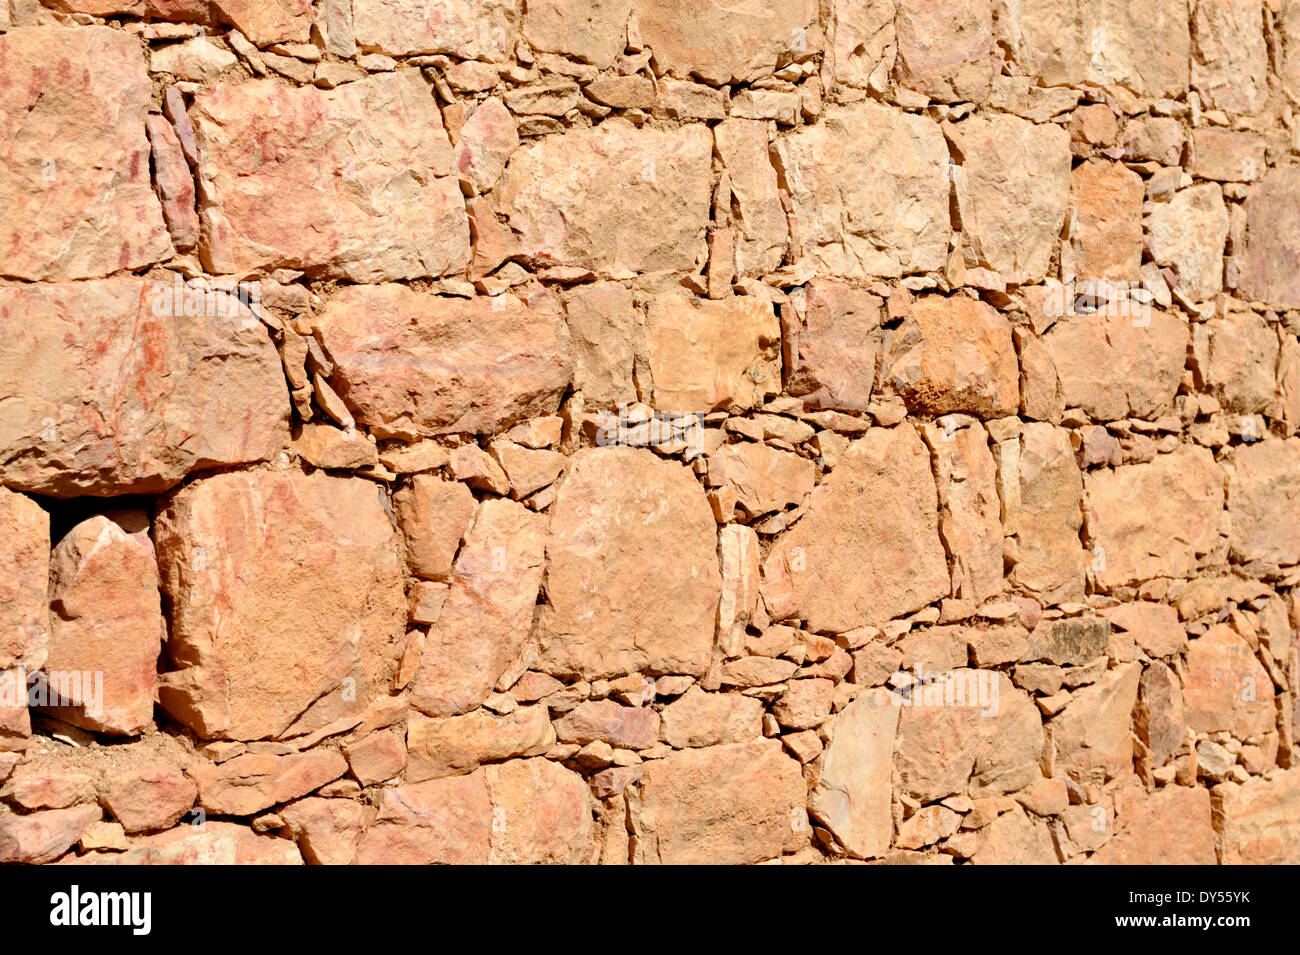 Dry stone wall, built with small stones filling between the larger ones. Morocco Stock Photo